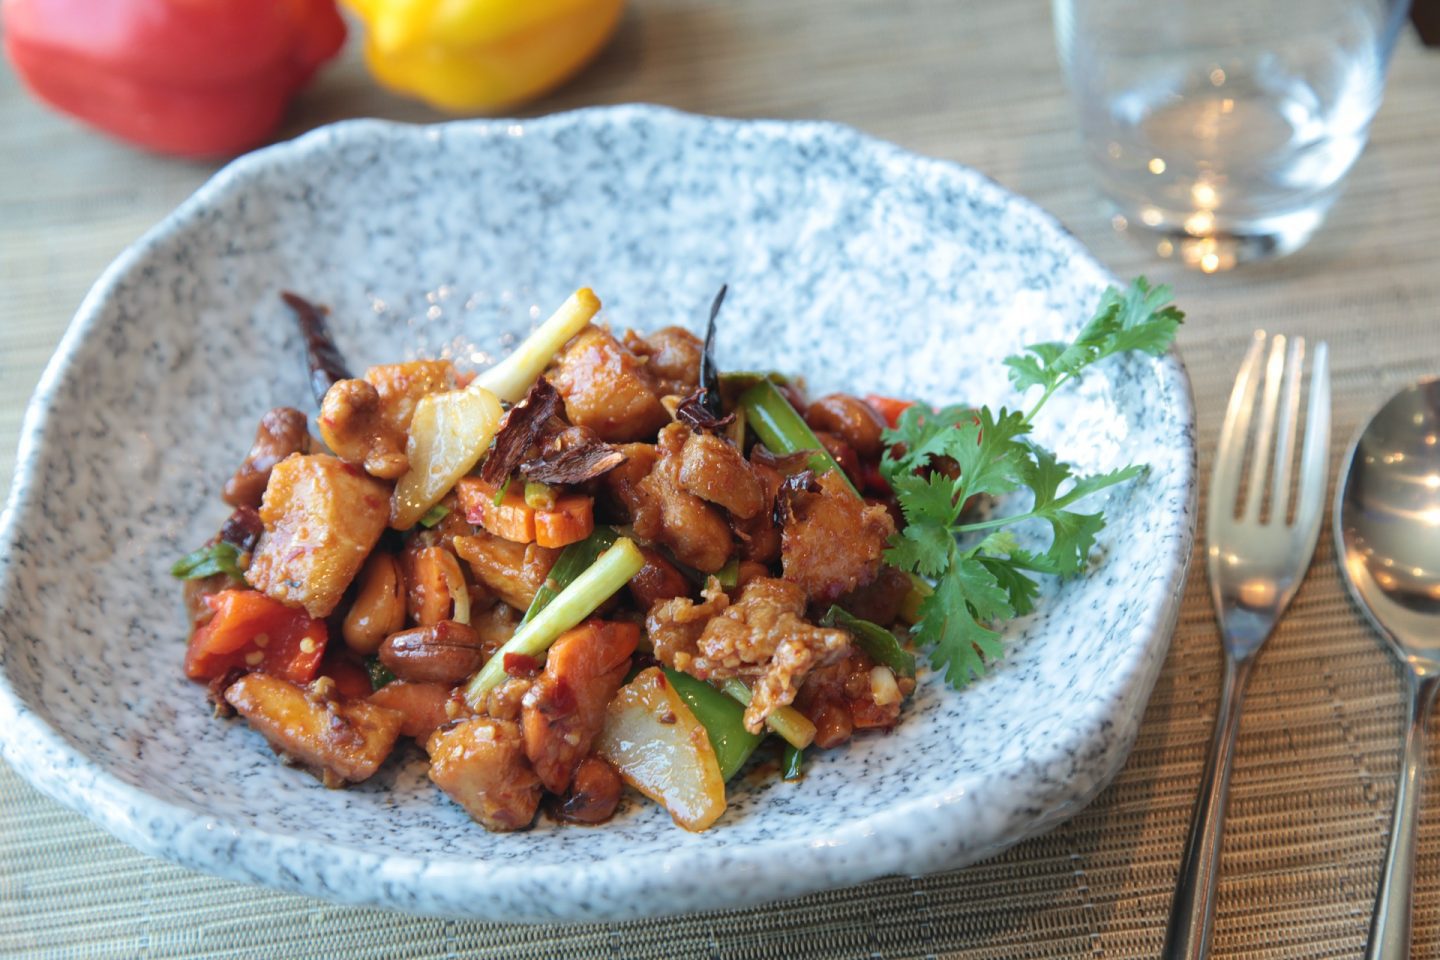 A large dish containing sweet and sour chicken and garnish, a potential freezer meal